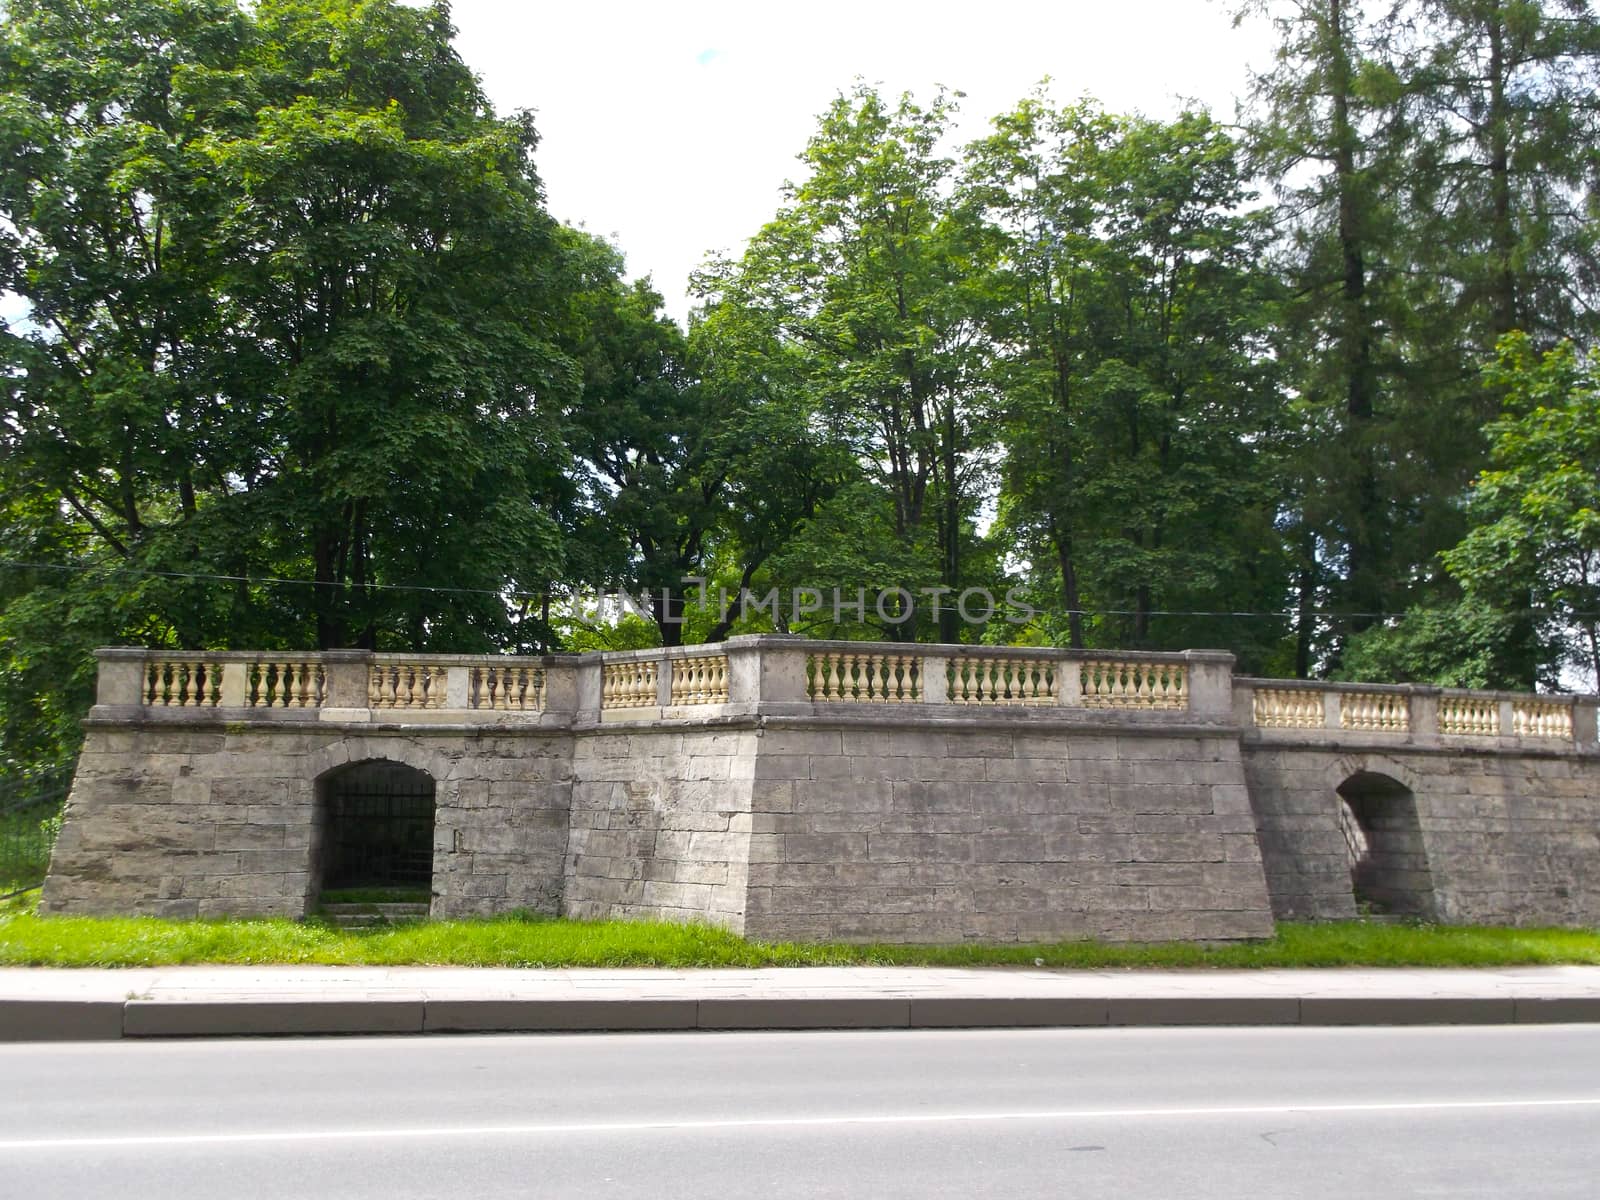 stone construction with railings on the background of green trees